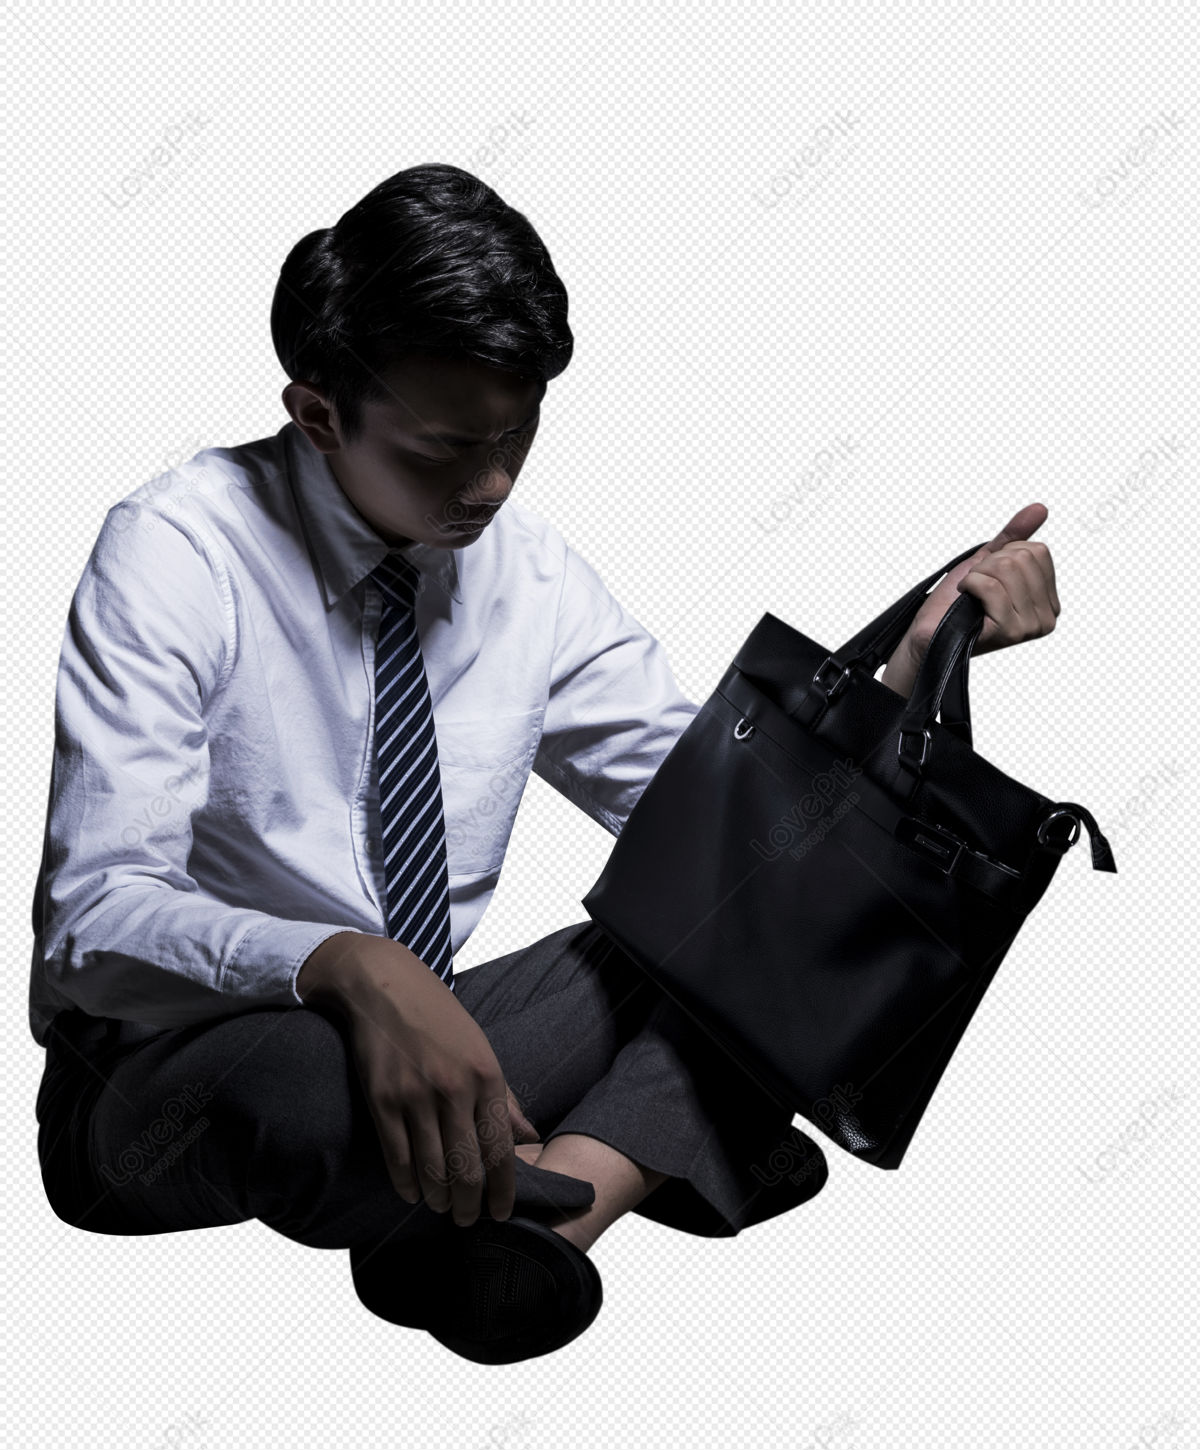 Male Workplace Stress PNG Transparent Image And Clipart Image For Free  Download - Lovepik | 400976967